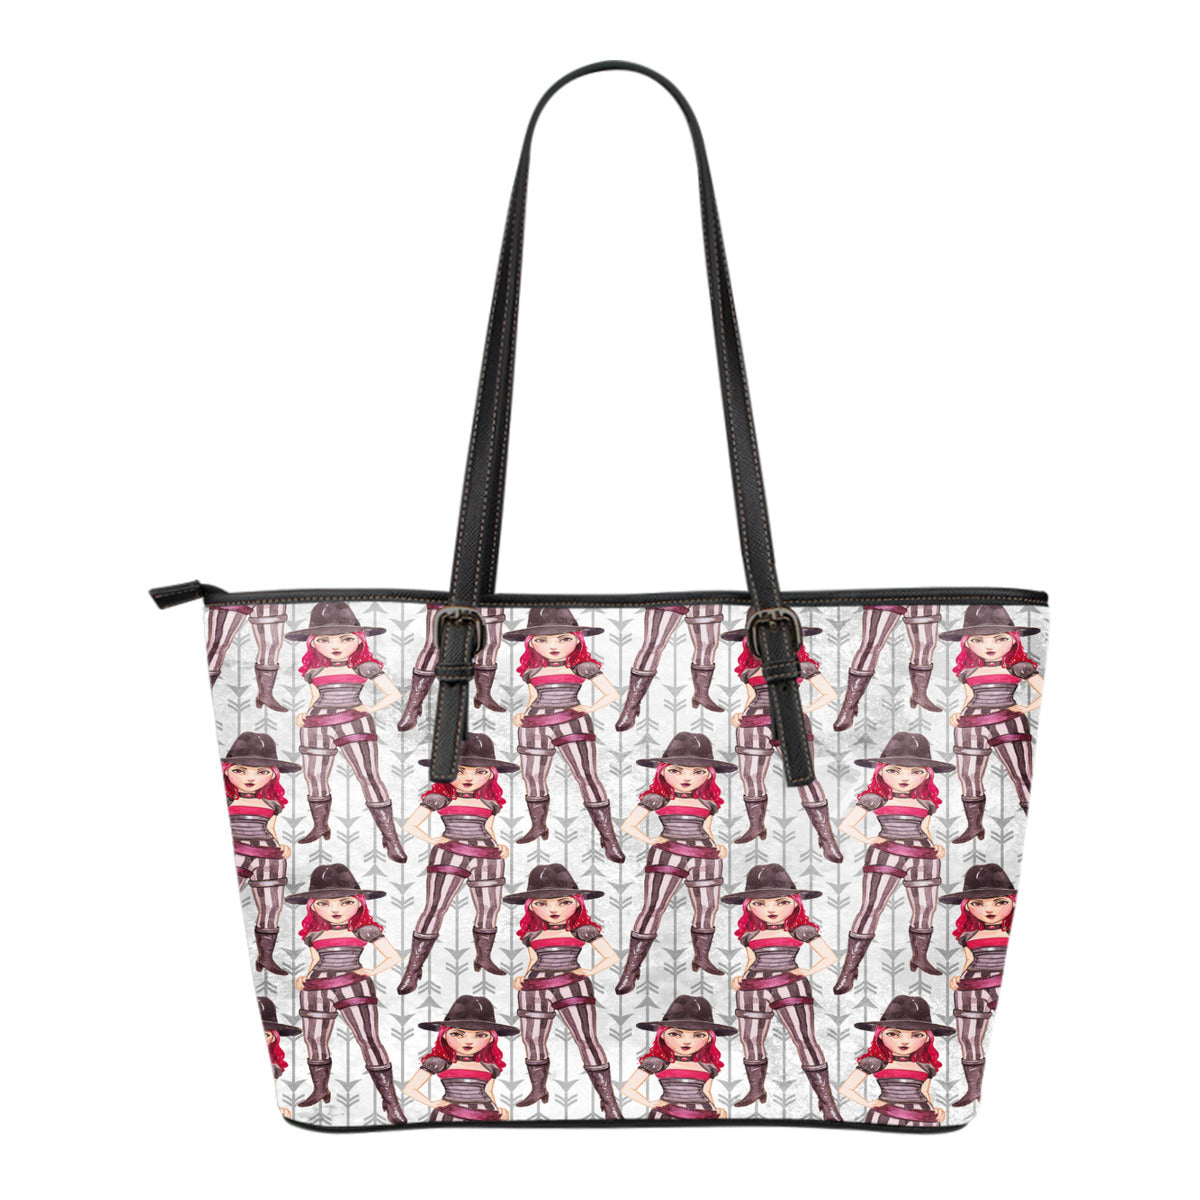 Vampire Themed Design C10 Women Small Leather Tote Bag